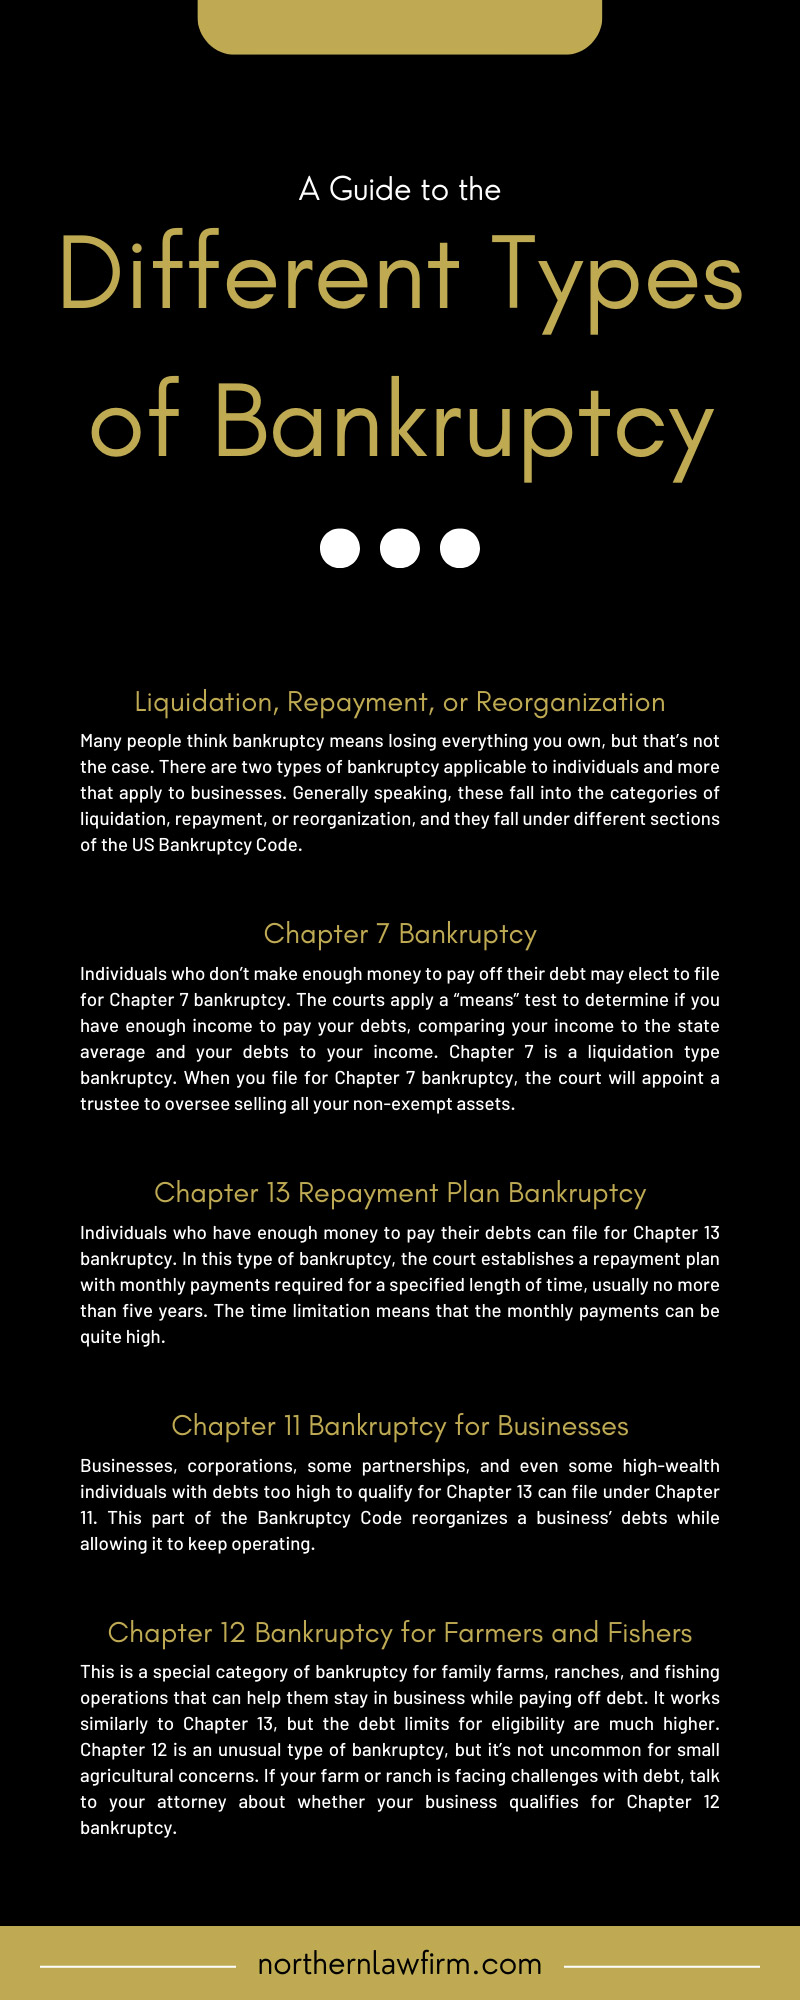 A Guide to the Different Types of Bankruptcy